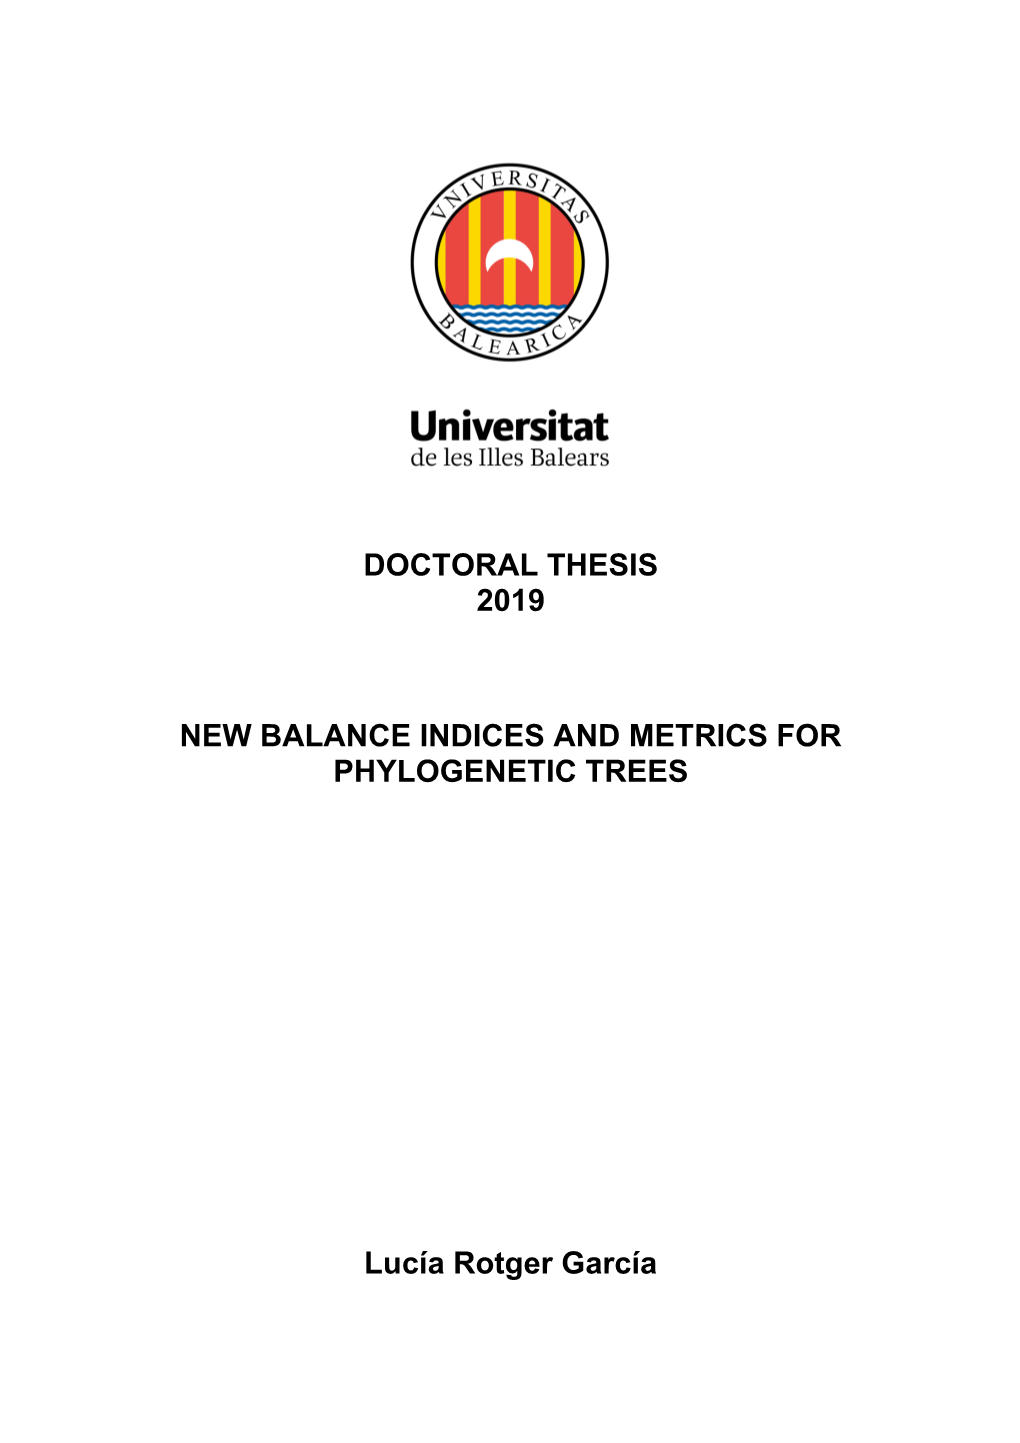 DOCTORAL THESIS 2019 NEW BALANCE INDICES and METRICS for PHYLOGENETIC TREES Lucía Rotger García